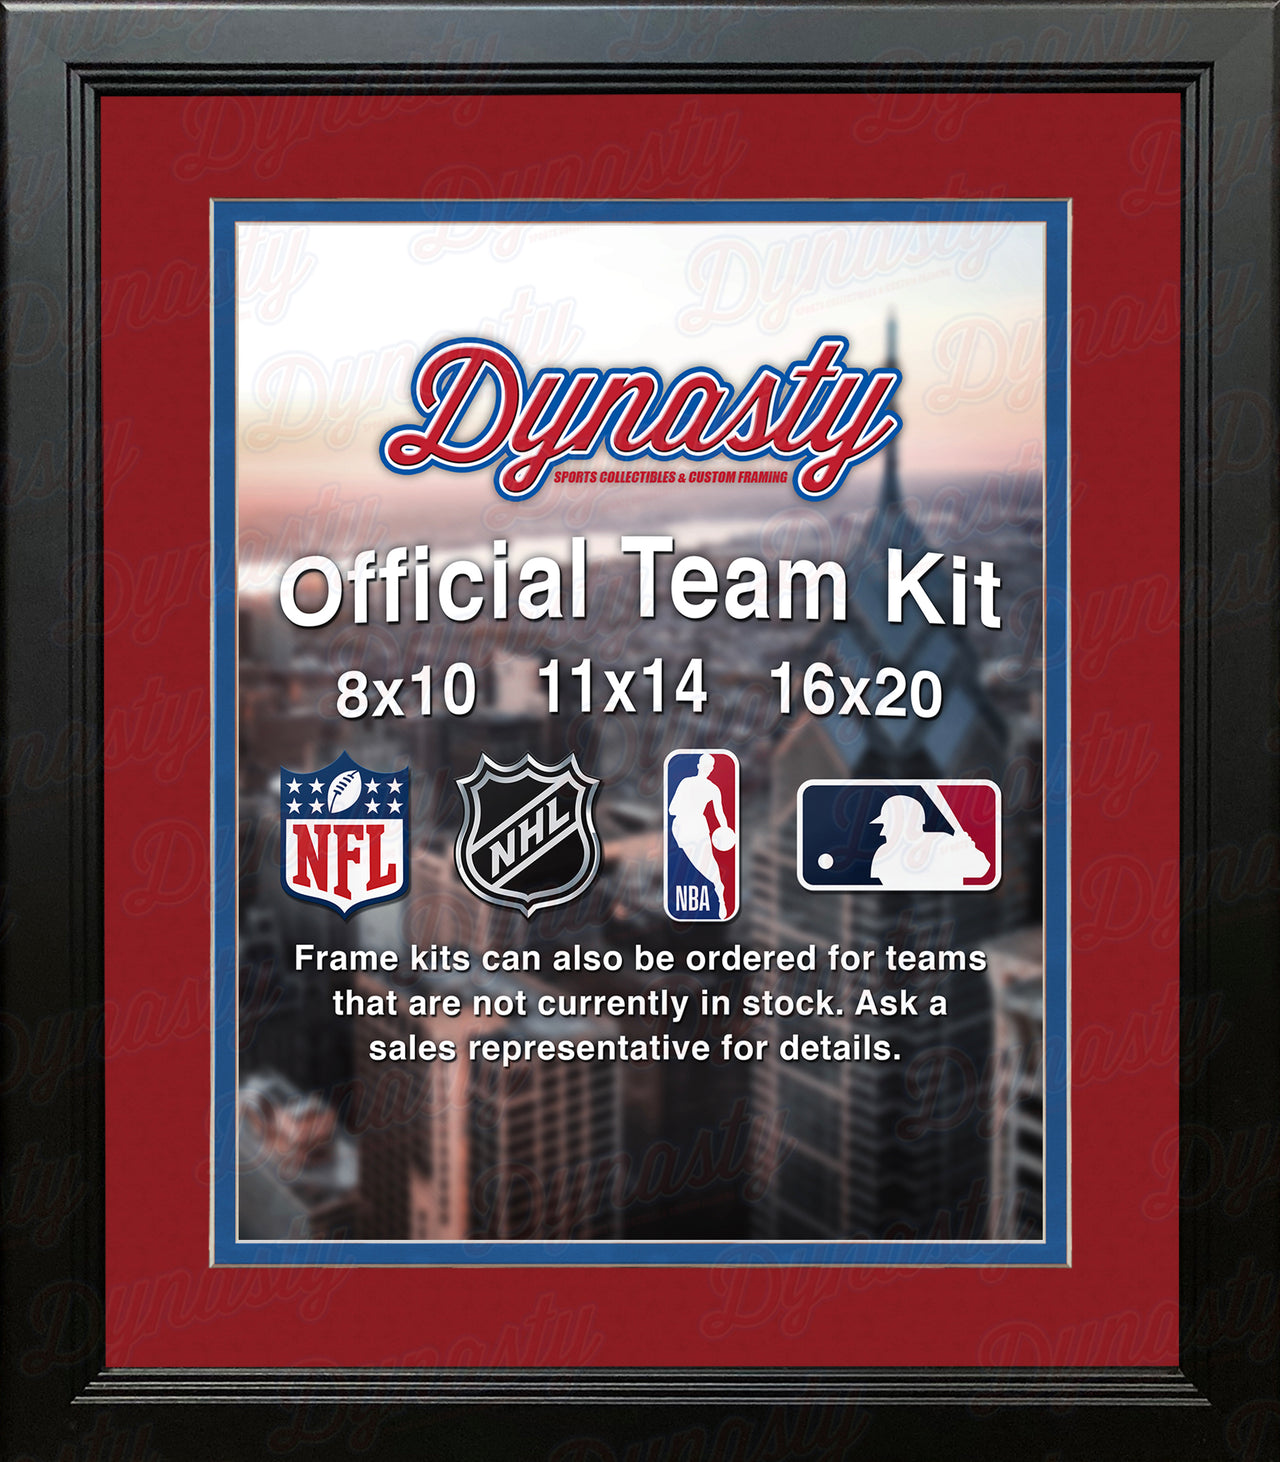 NBA Basketball Photo Picture Frame Kit - Los Angeles Clippers (Red Matting, Blue Trim) - Dynasty Sports & Framing 